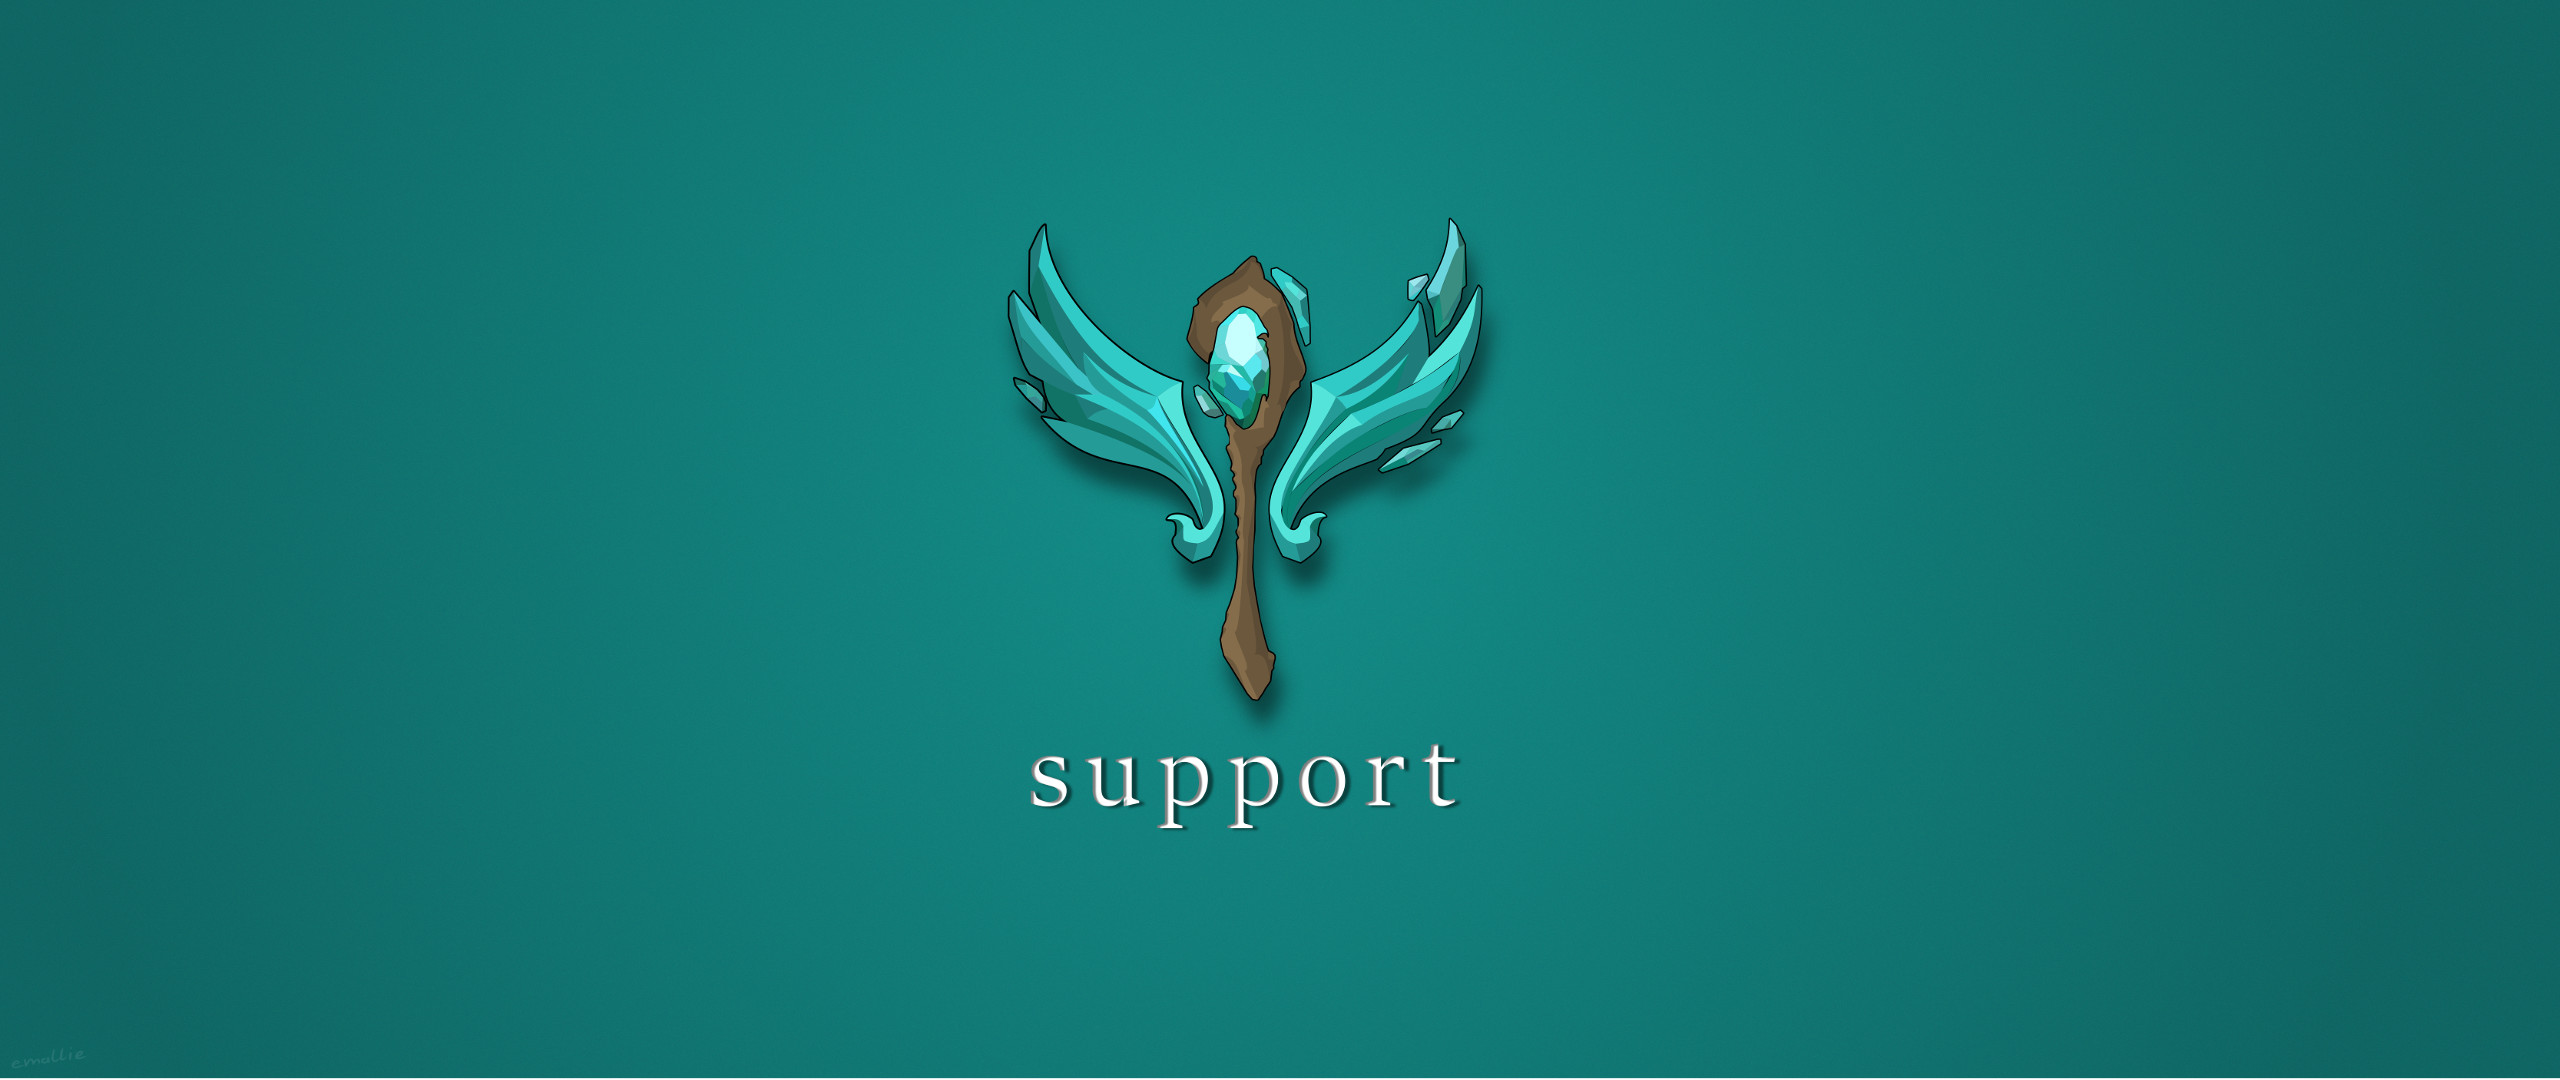 2560x1080 ... League of Legends support icon by emallie